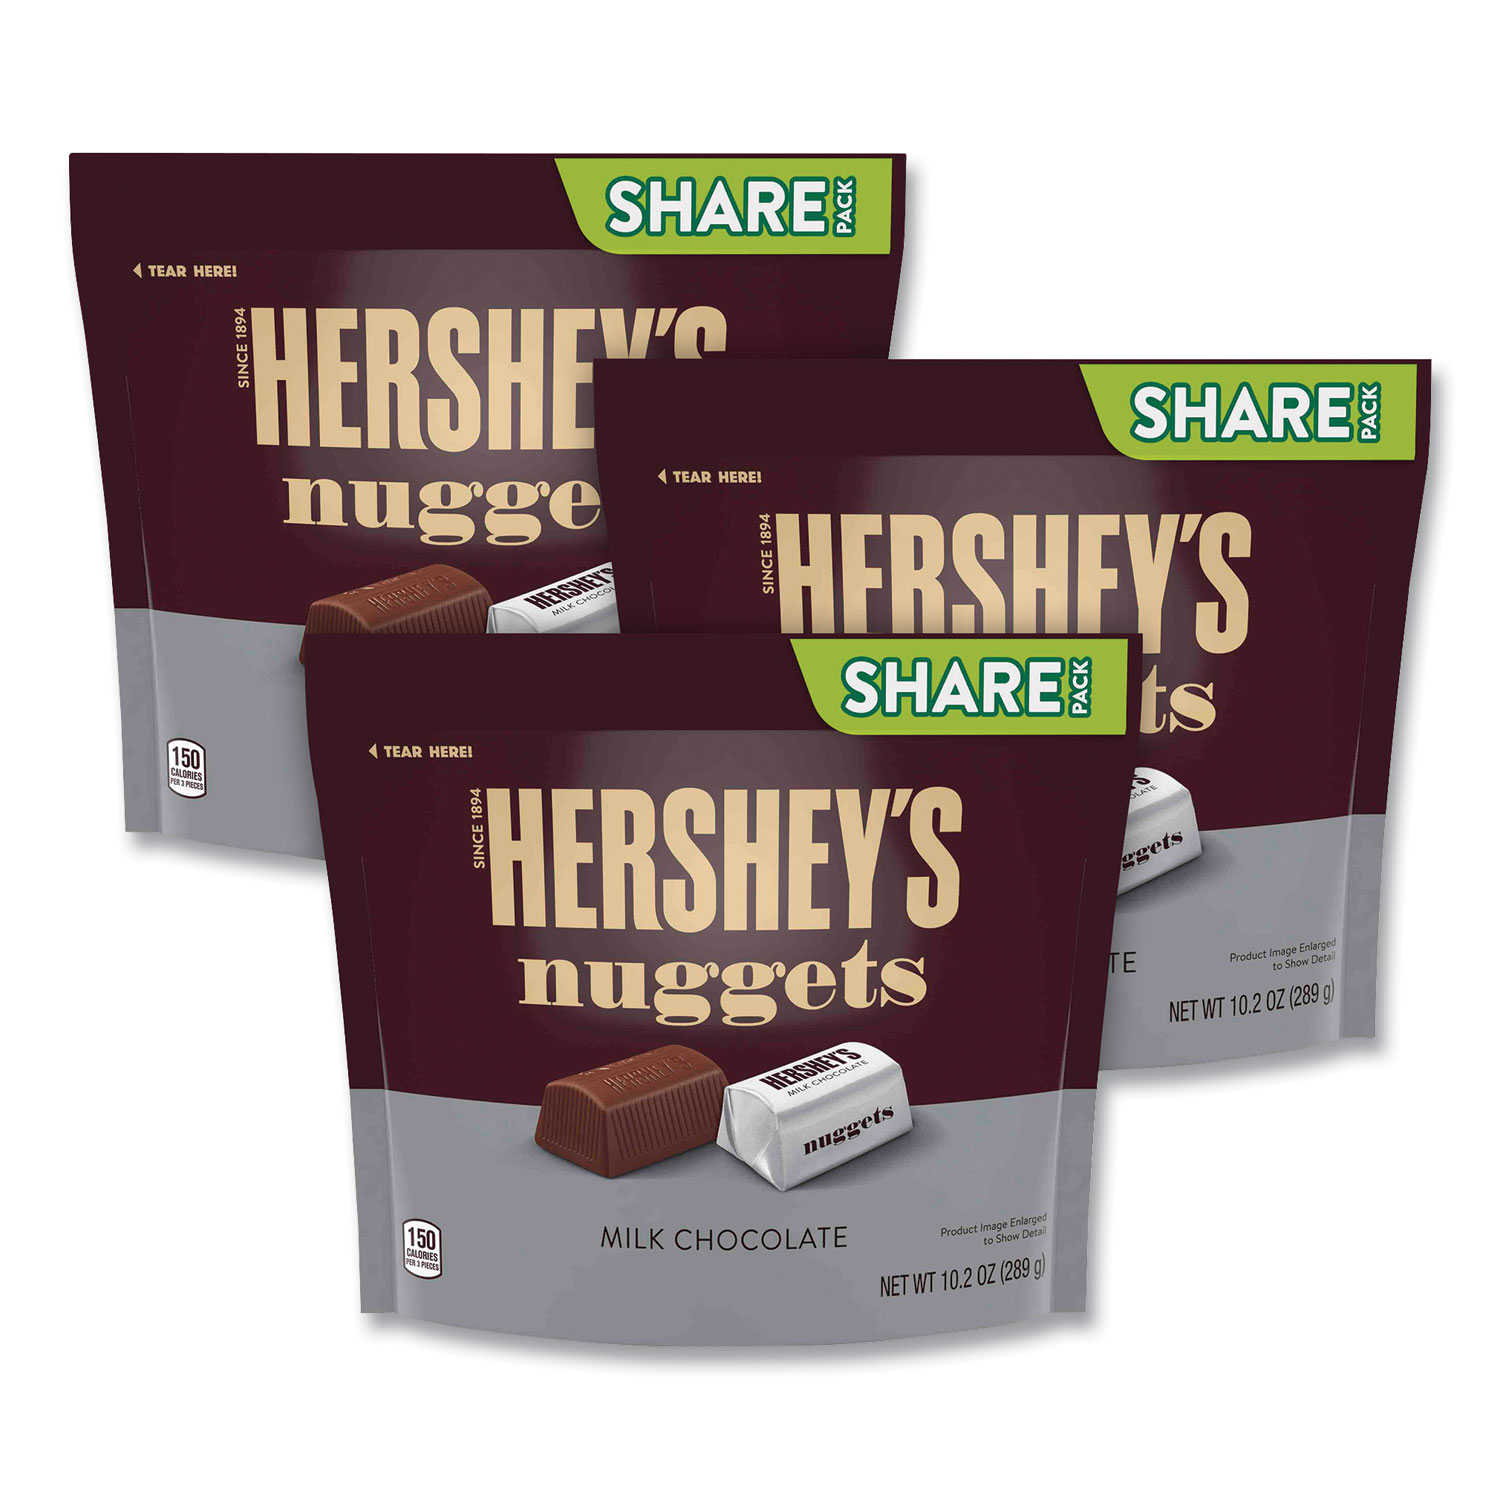  Hershey's 1870 Nuggets Share Pack, Milk Chocolate, 10.2 oz Bag, 3/Pack, Free Delivery in 1-4 Business Days (GRR24600441) 